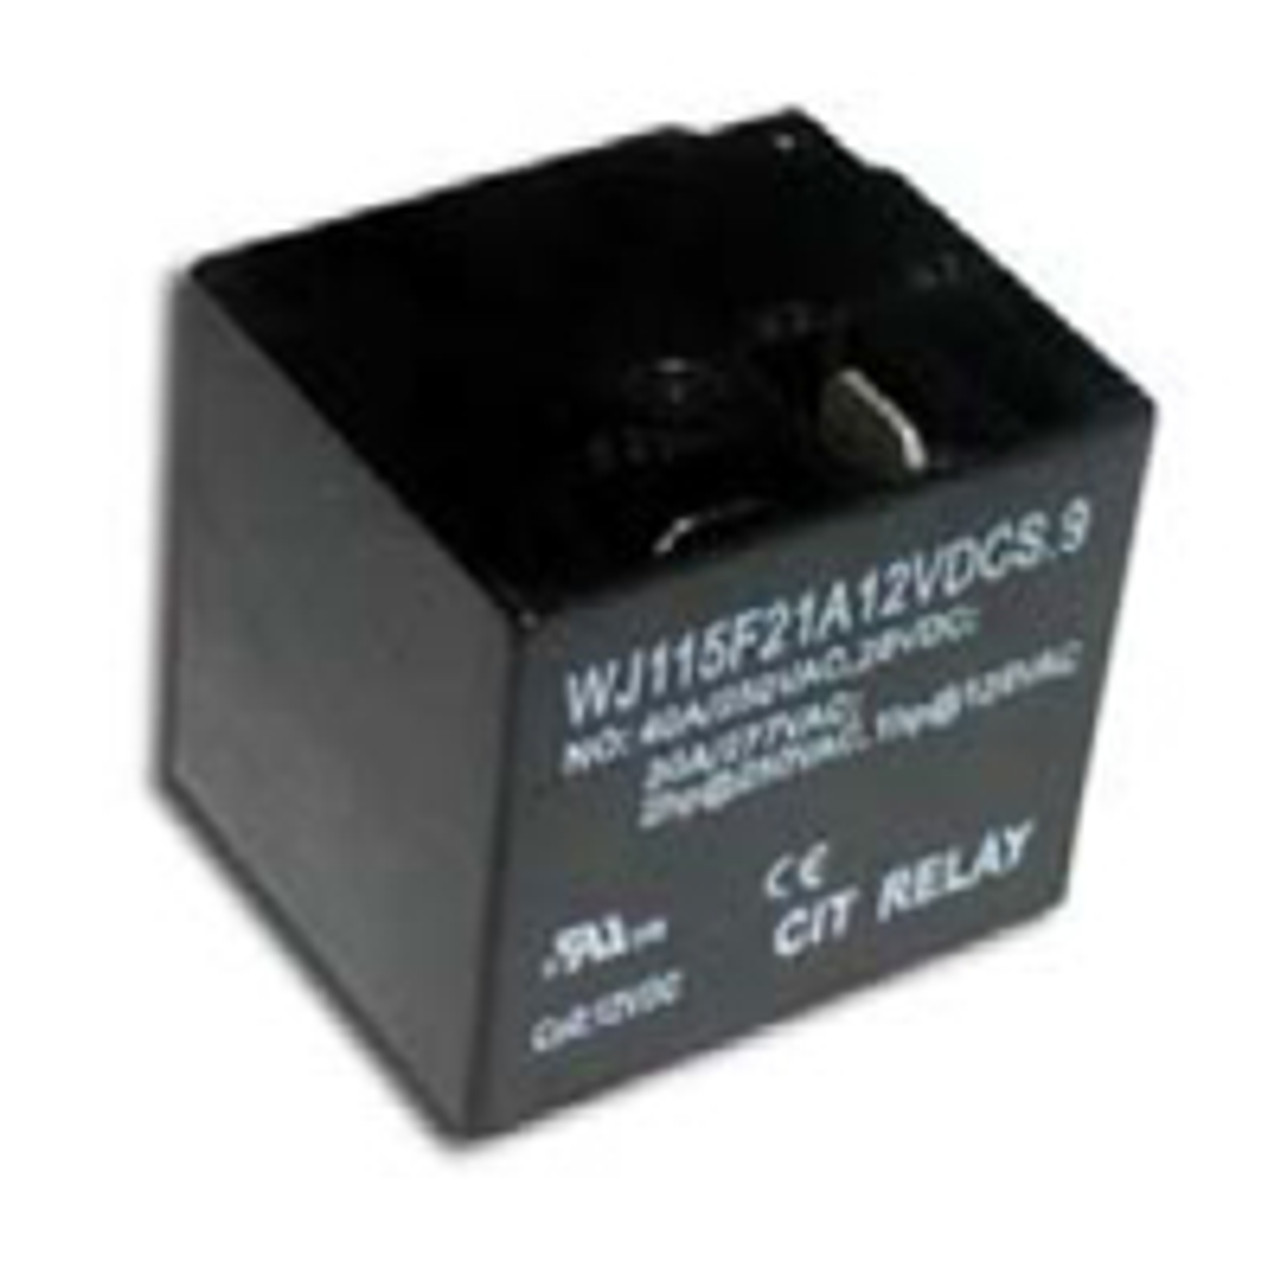 CIT Relay and Switch J115F21A120VACS Power Relays